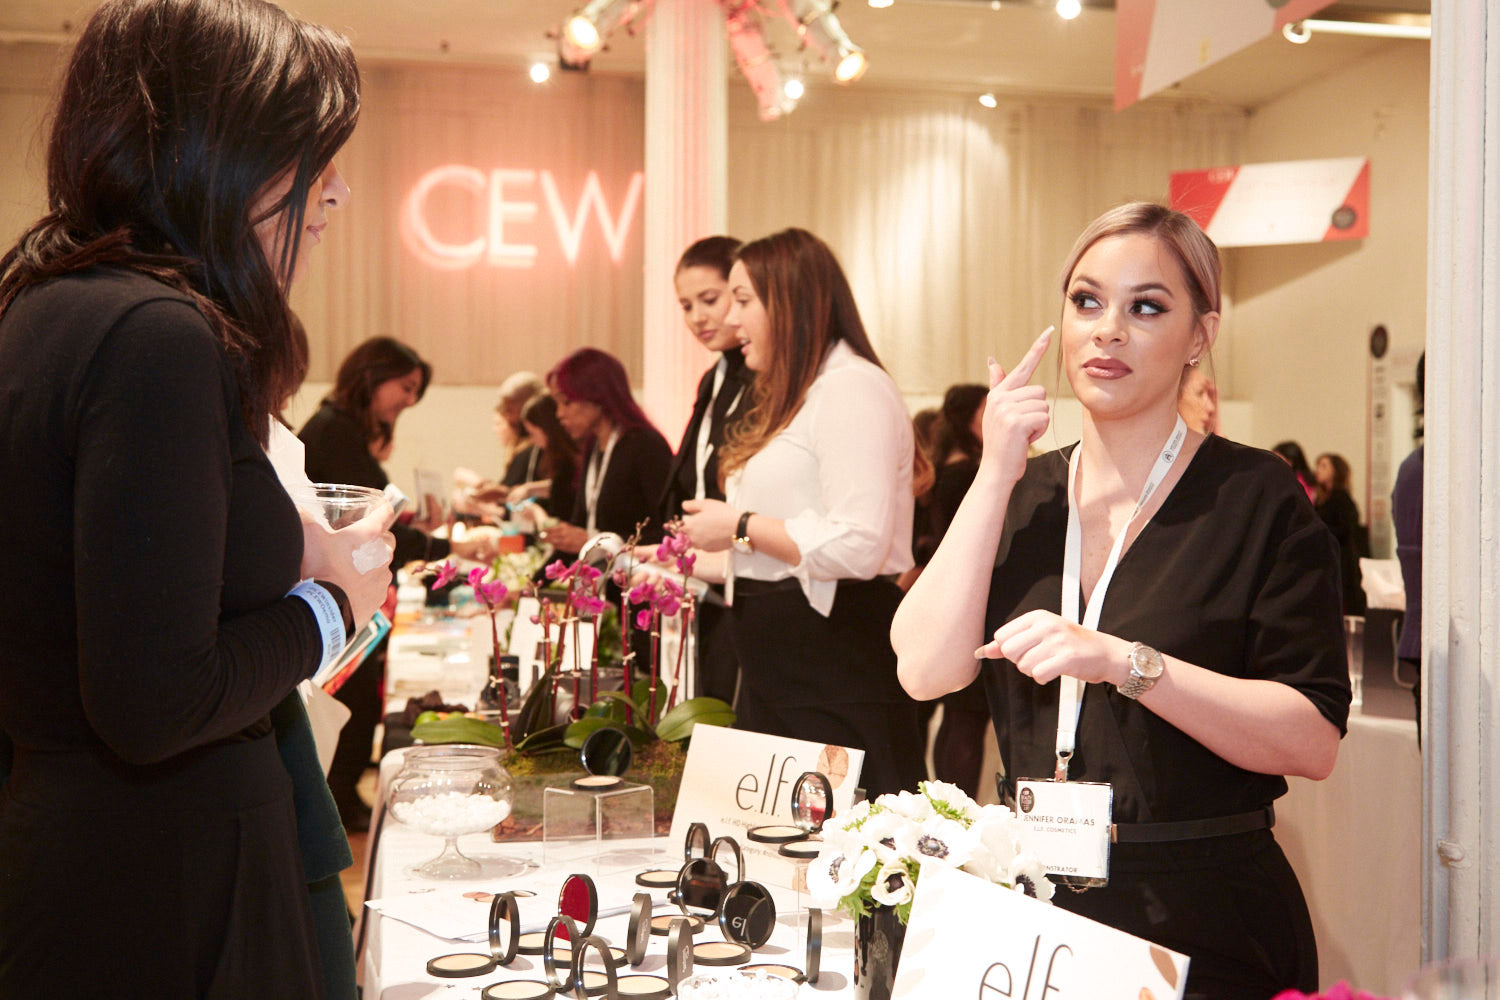 Review, Makeup, Trends 2017, 2018, 2019: 23rd Annual CEW Beauty Insider Awards, Product Demonstration